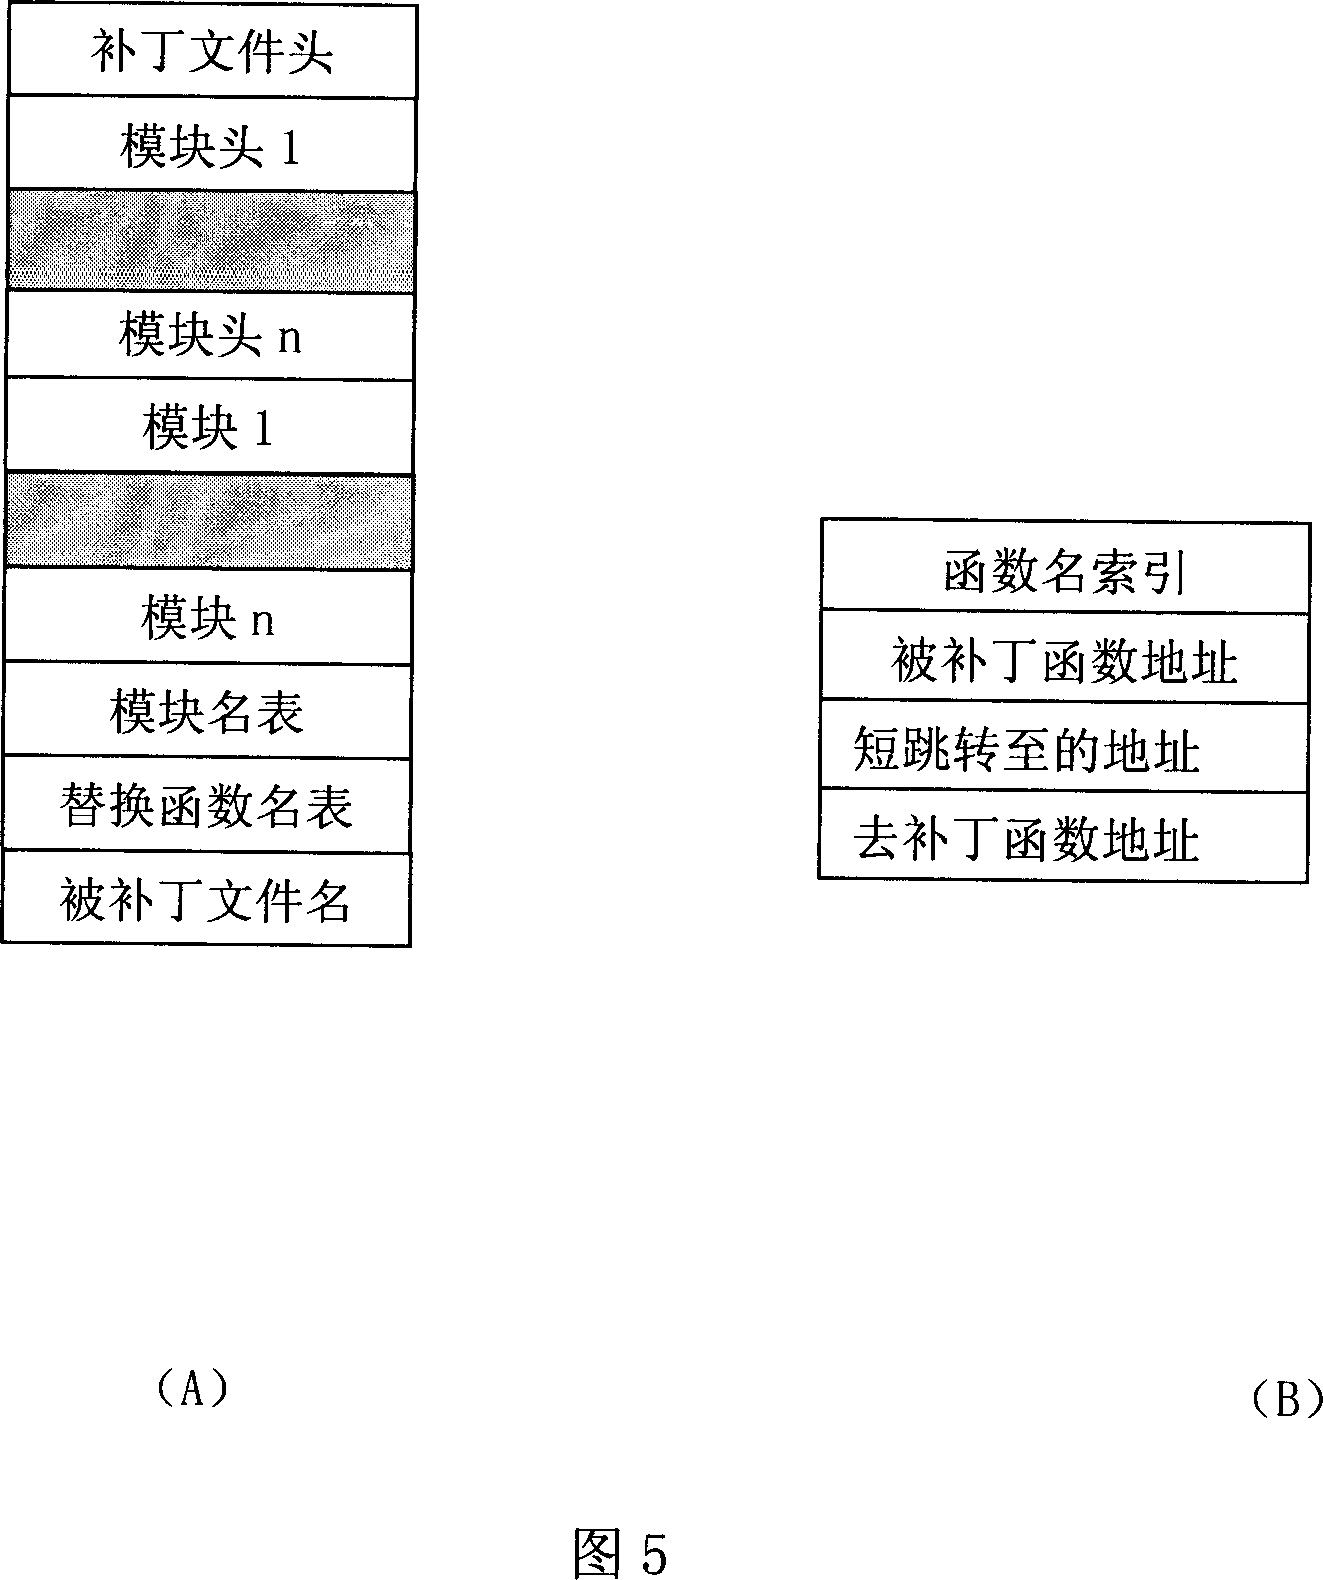 Method for implementing long jumping dynamic patch in embedded system